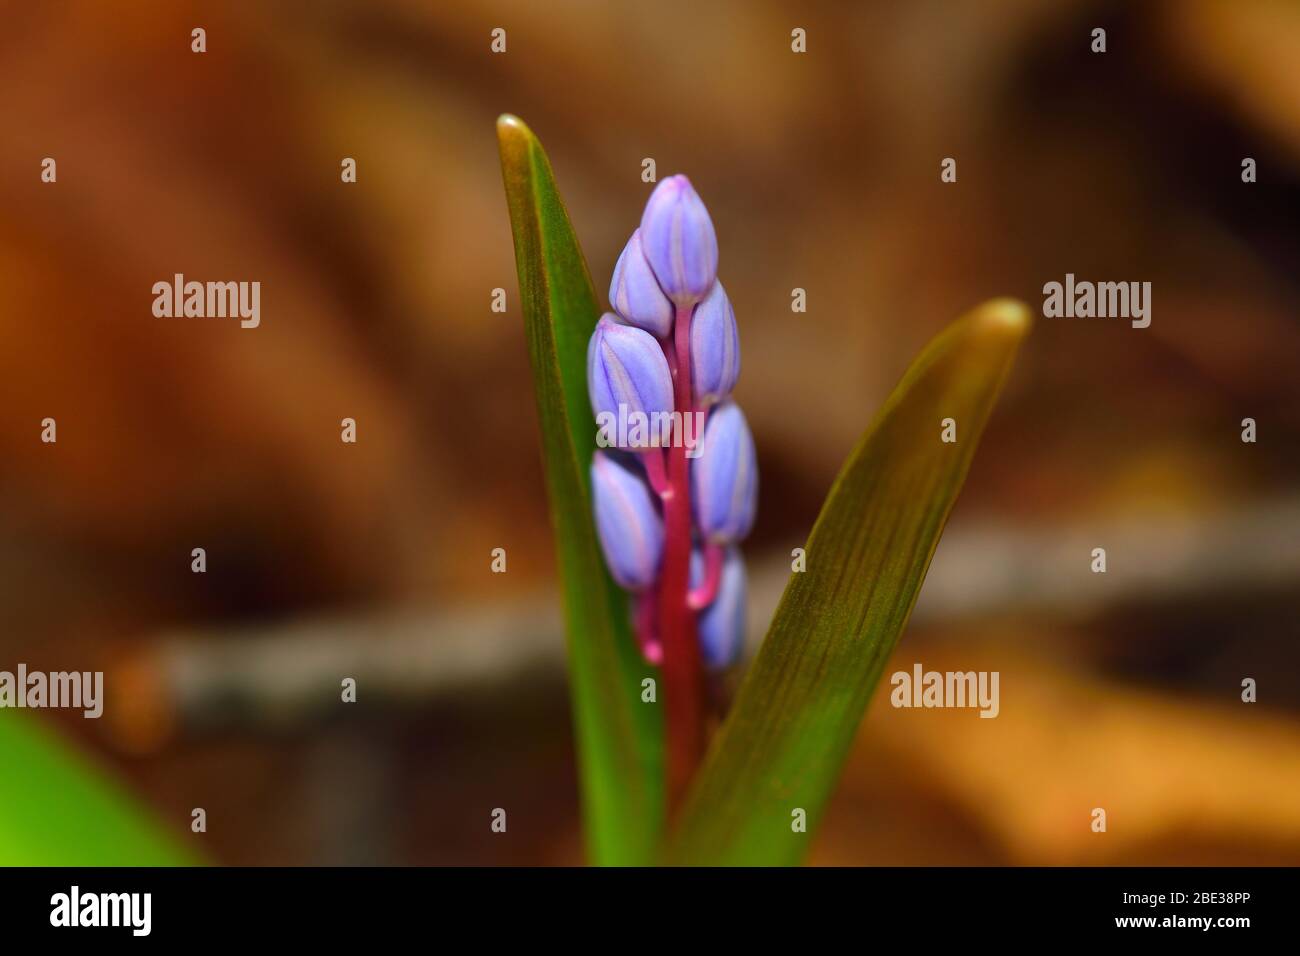 Beautiful scilla flower on a brown leaves background. Violet to gentian-blue gradient. Stock Photo